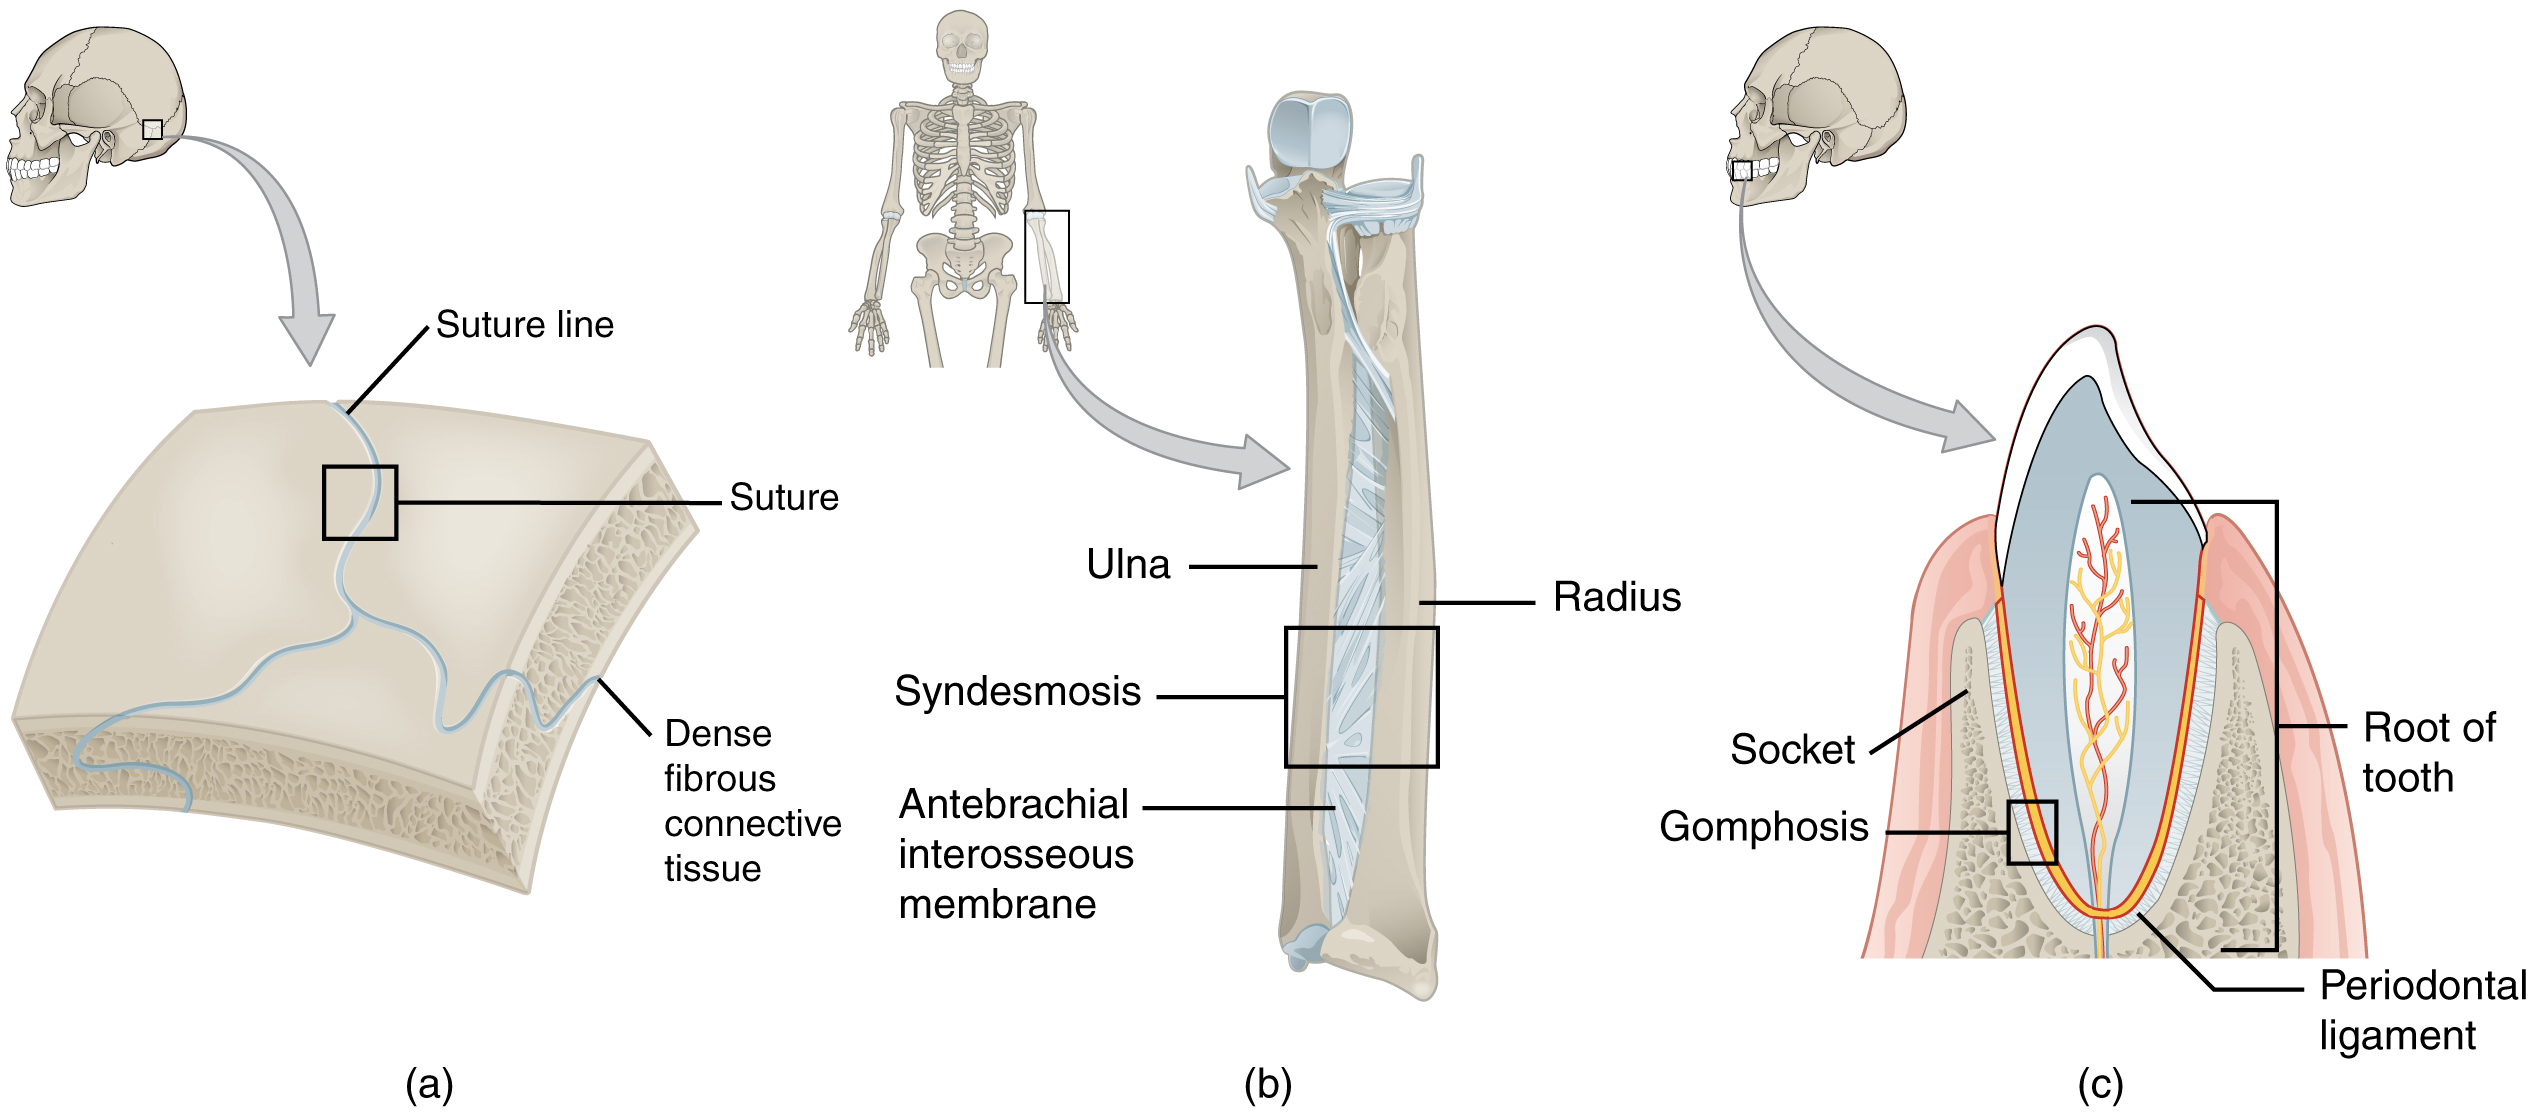 This figure shows the different types of fibrous joints. The right panel shows sutures, the middle panel shows an interosseous membrane, and the left panel shows a gomphosis.